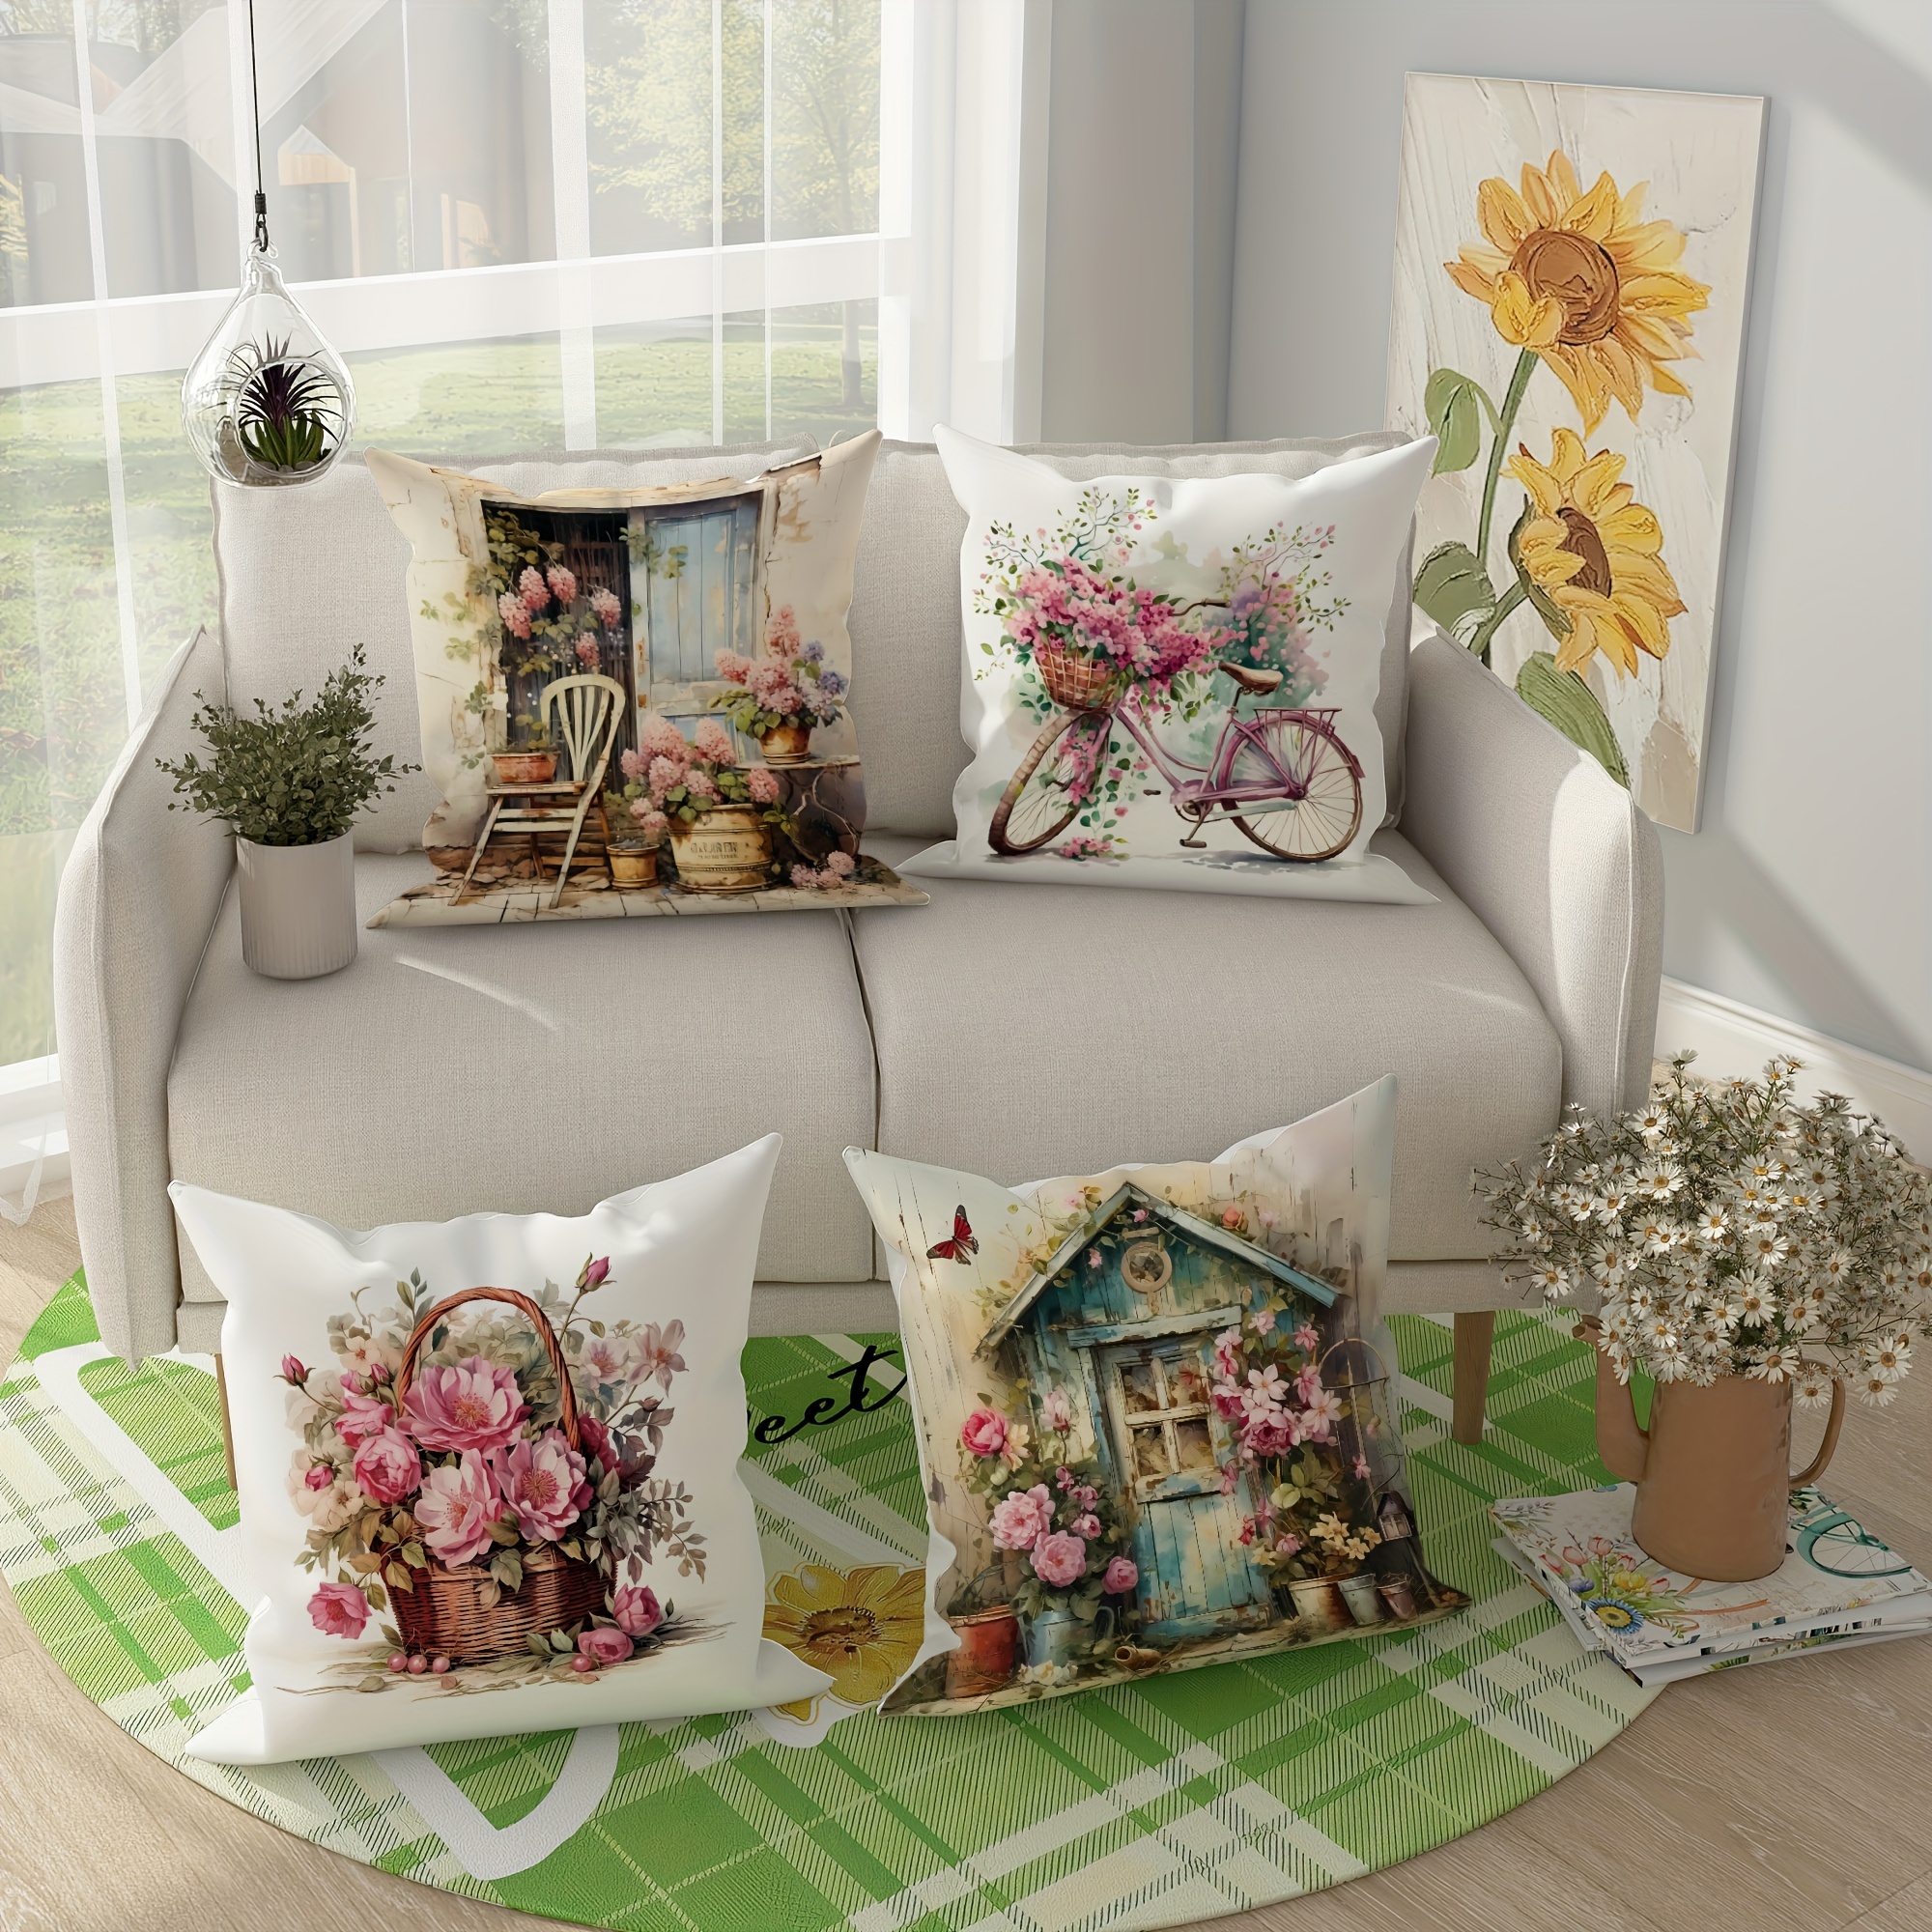 

blossom Charm" Spring Cottage Velvet Throw Pillow Covers, 4pc Set - Farmhouse Bicycle & Flower Basket Design For Living Room And Bedroom Decor